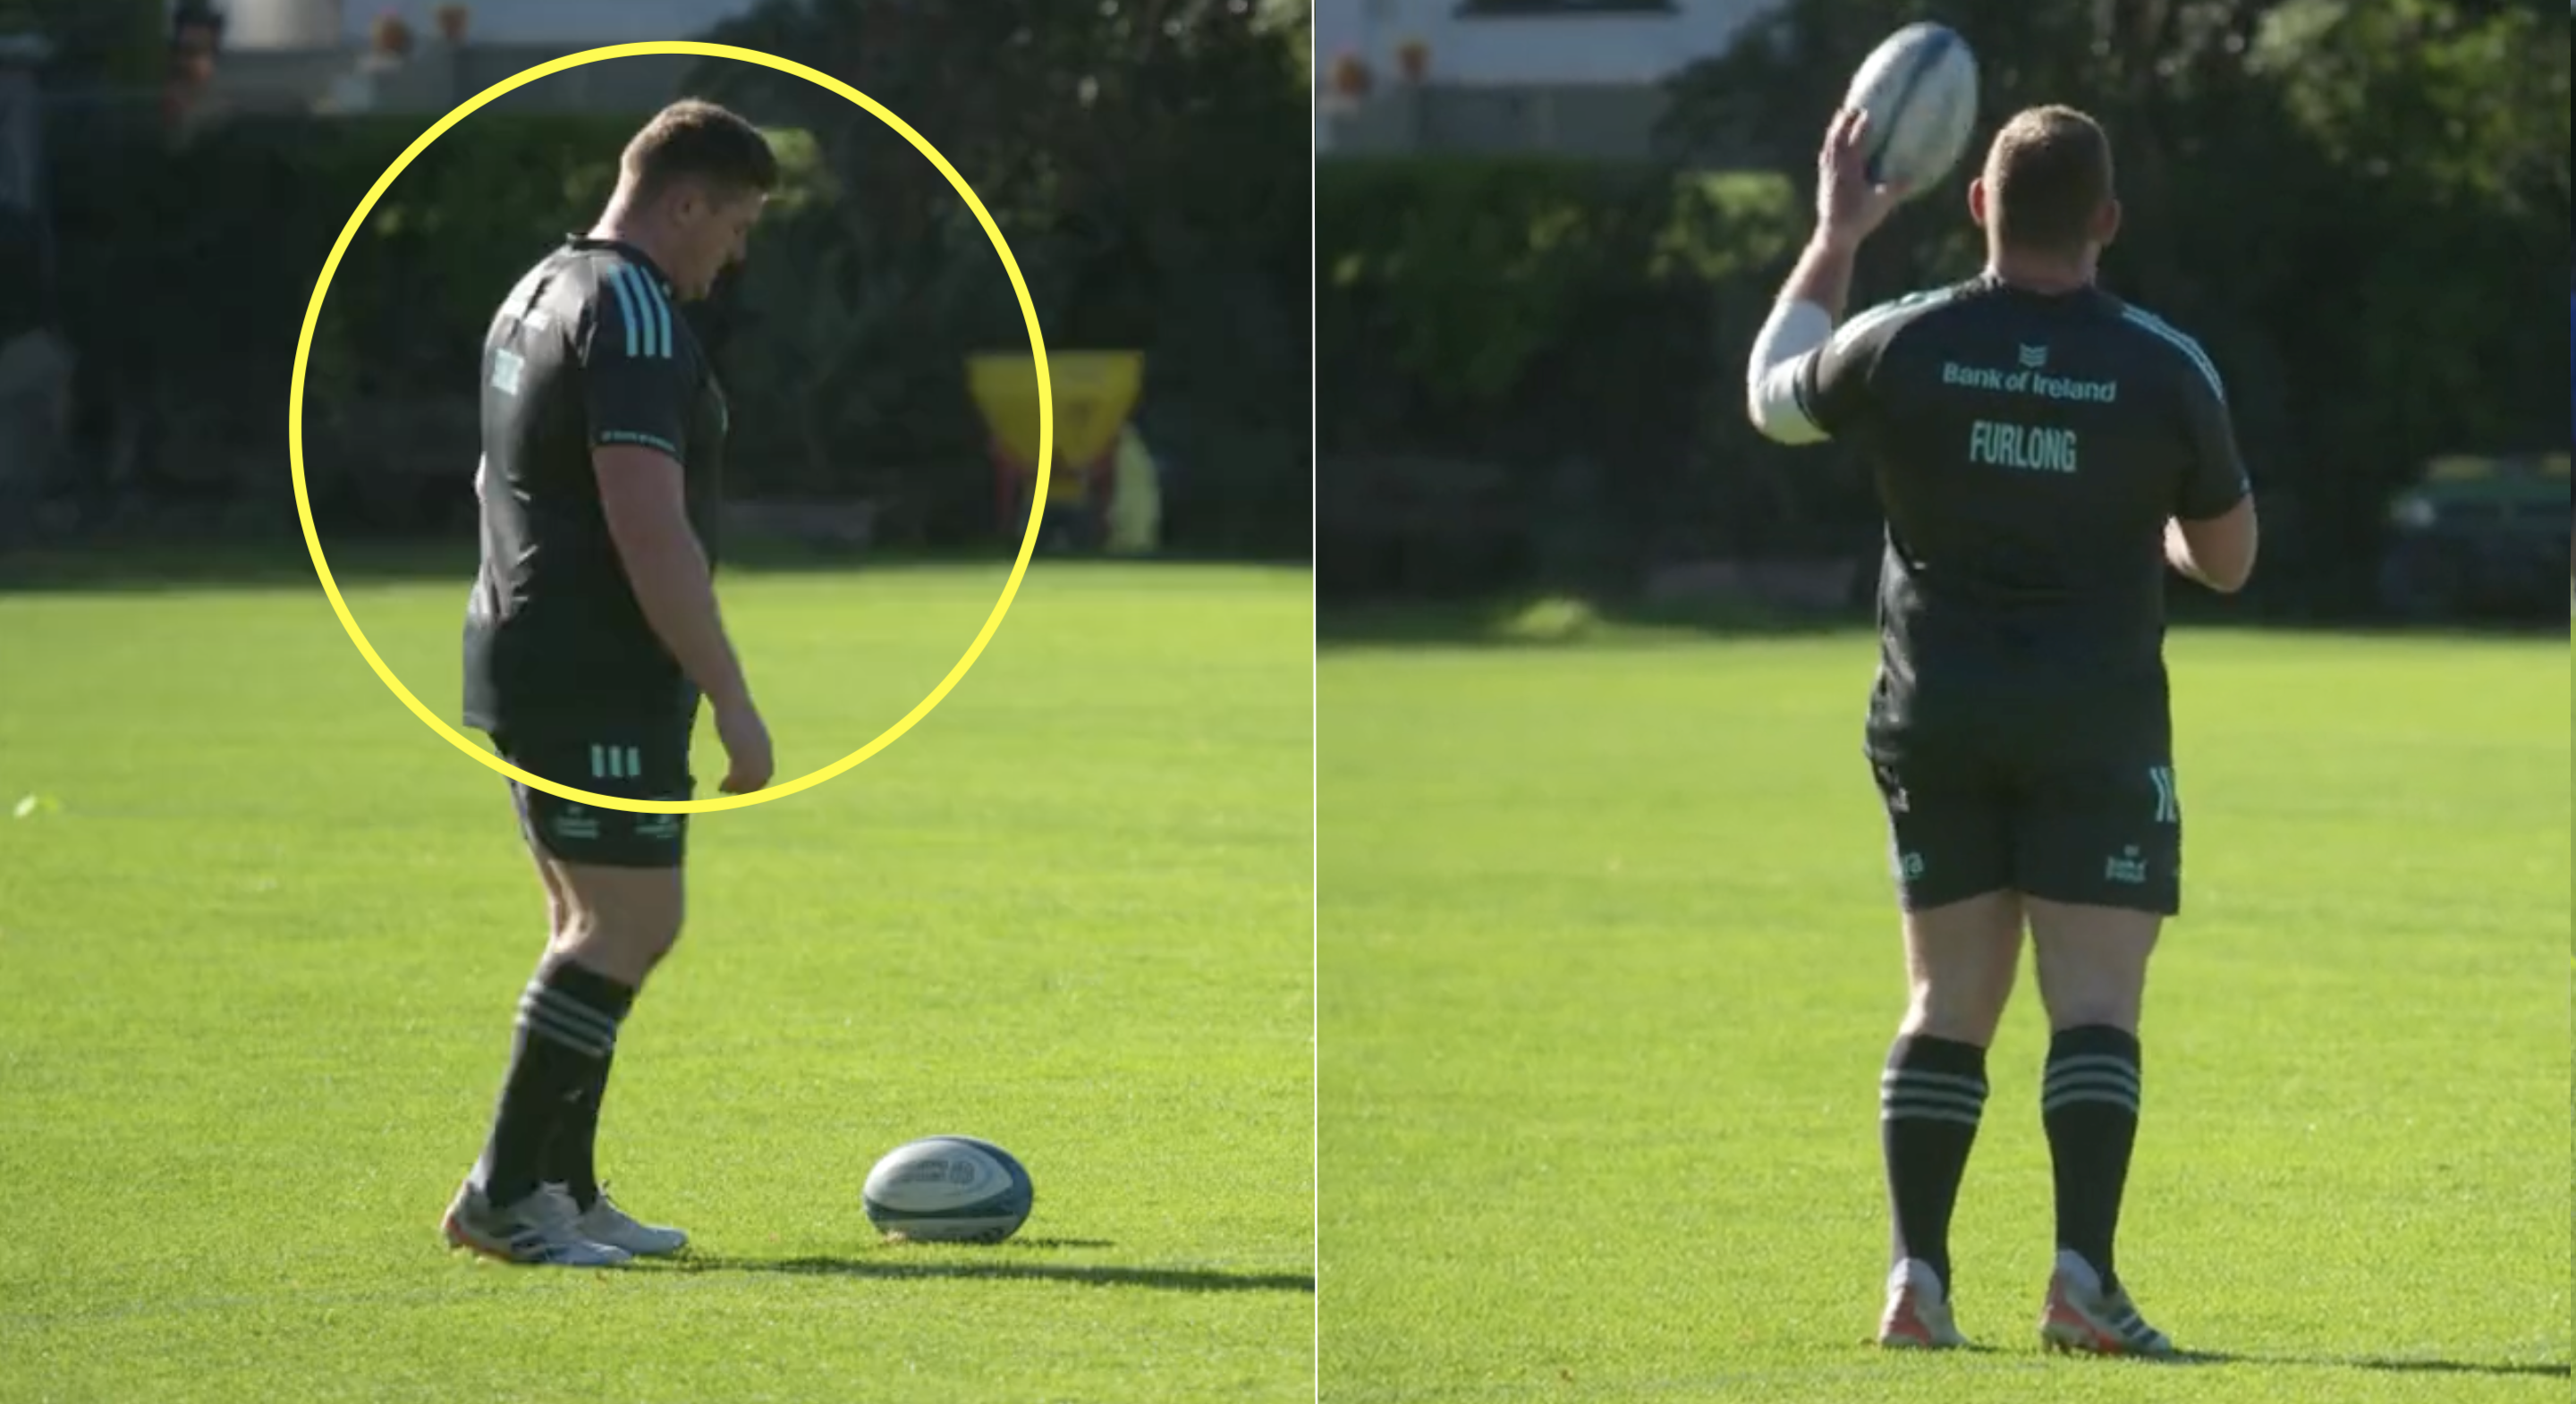 Tadhg Furlong shows again he's a No10 trapped inside a 125kg body